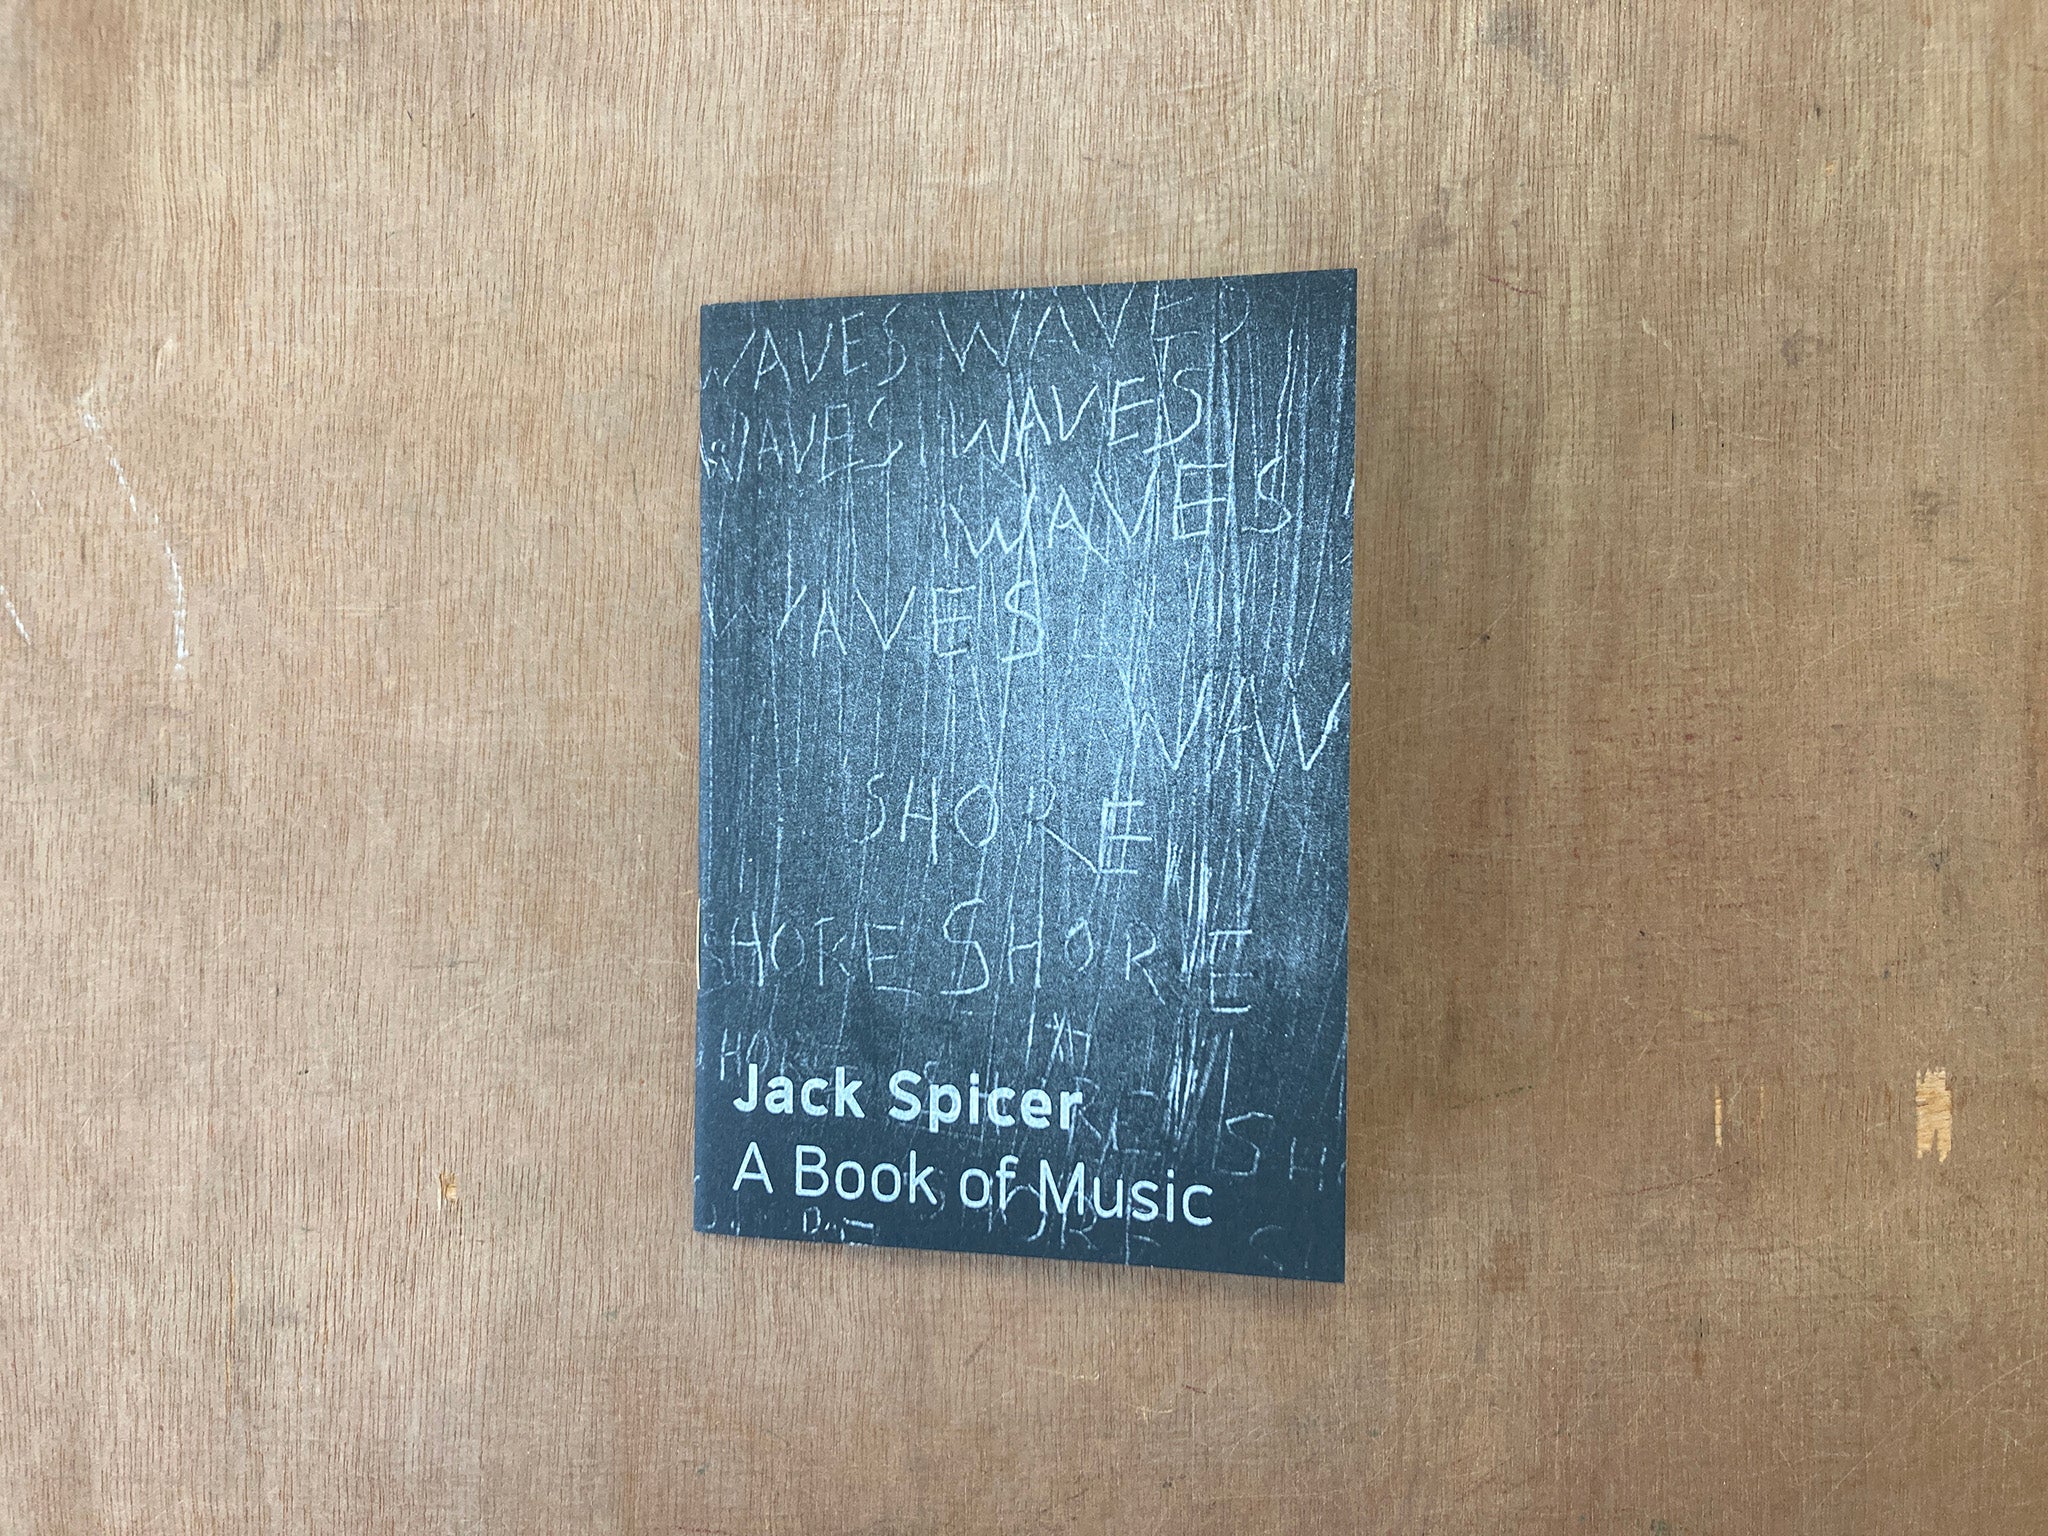 A BOOK OF MUSIC (1958) by Jack Spicer